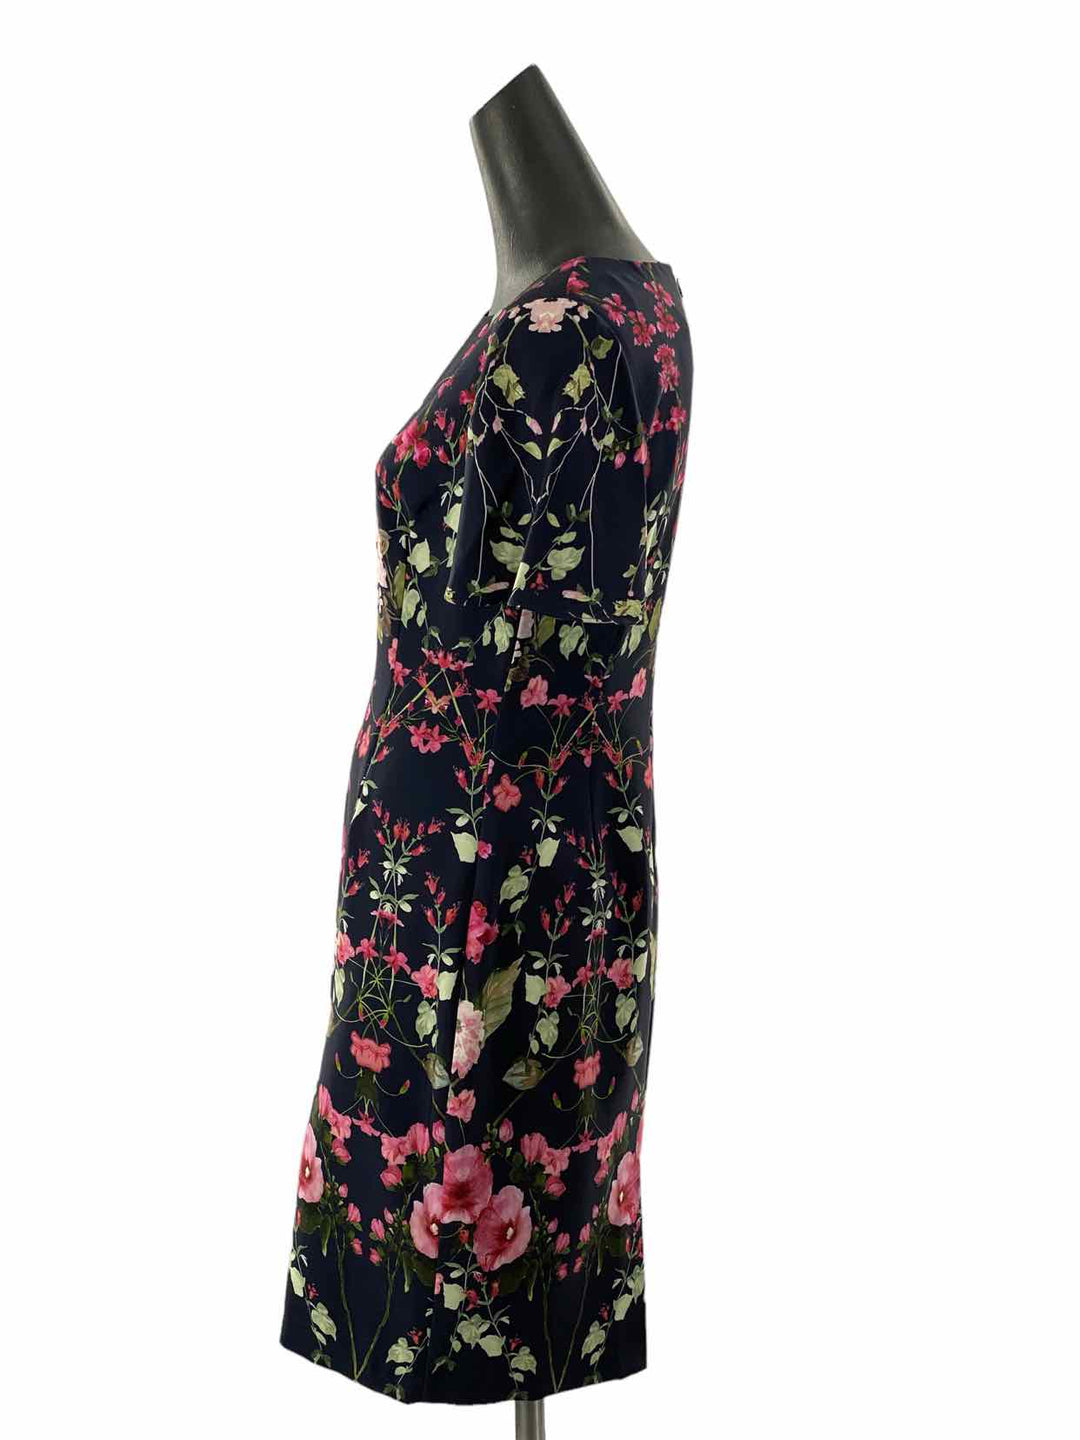 Adriana Papell Size 8 Blue Floral Dress